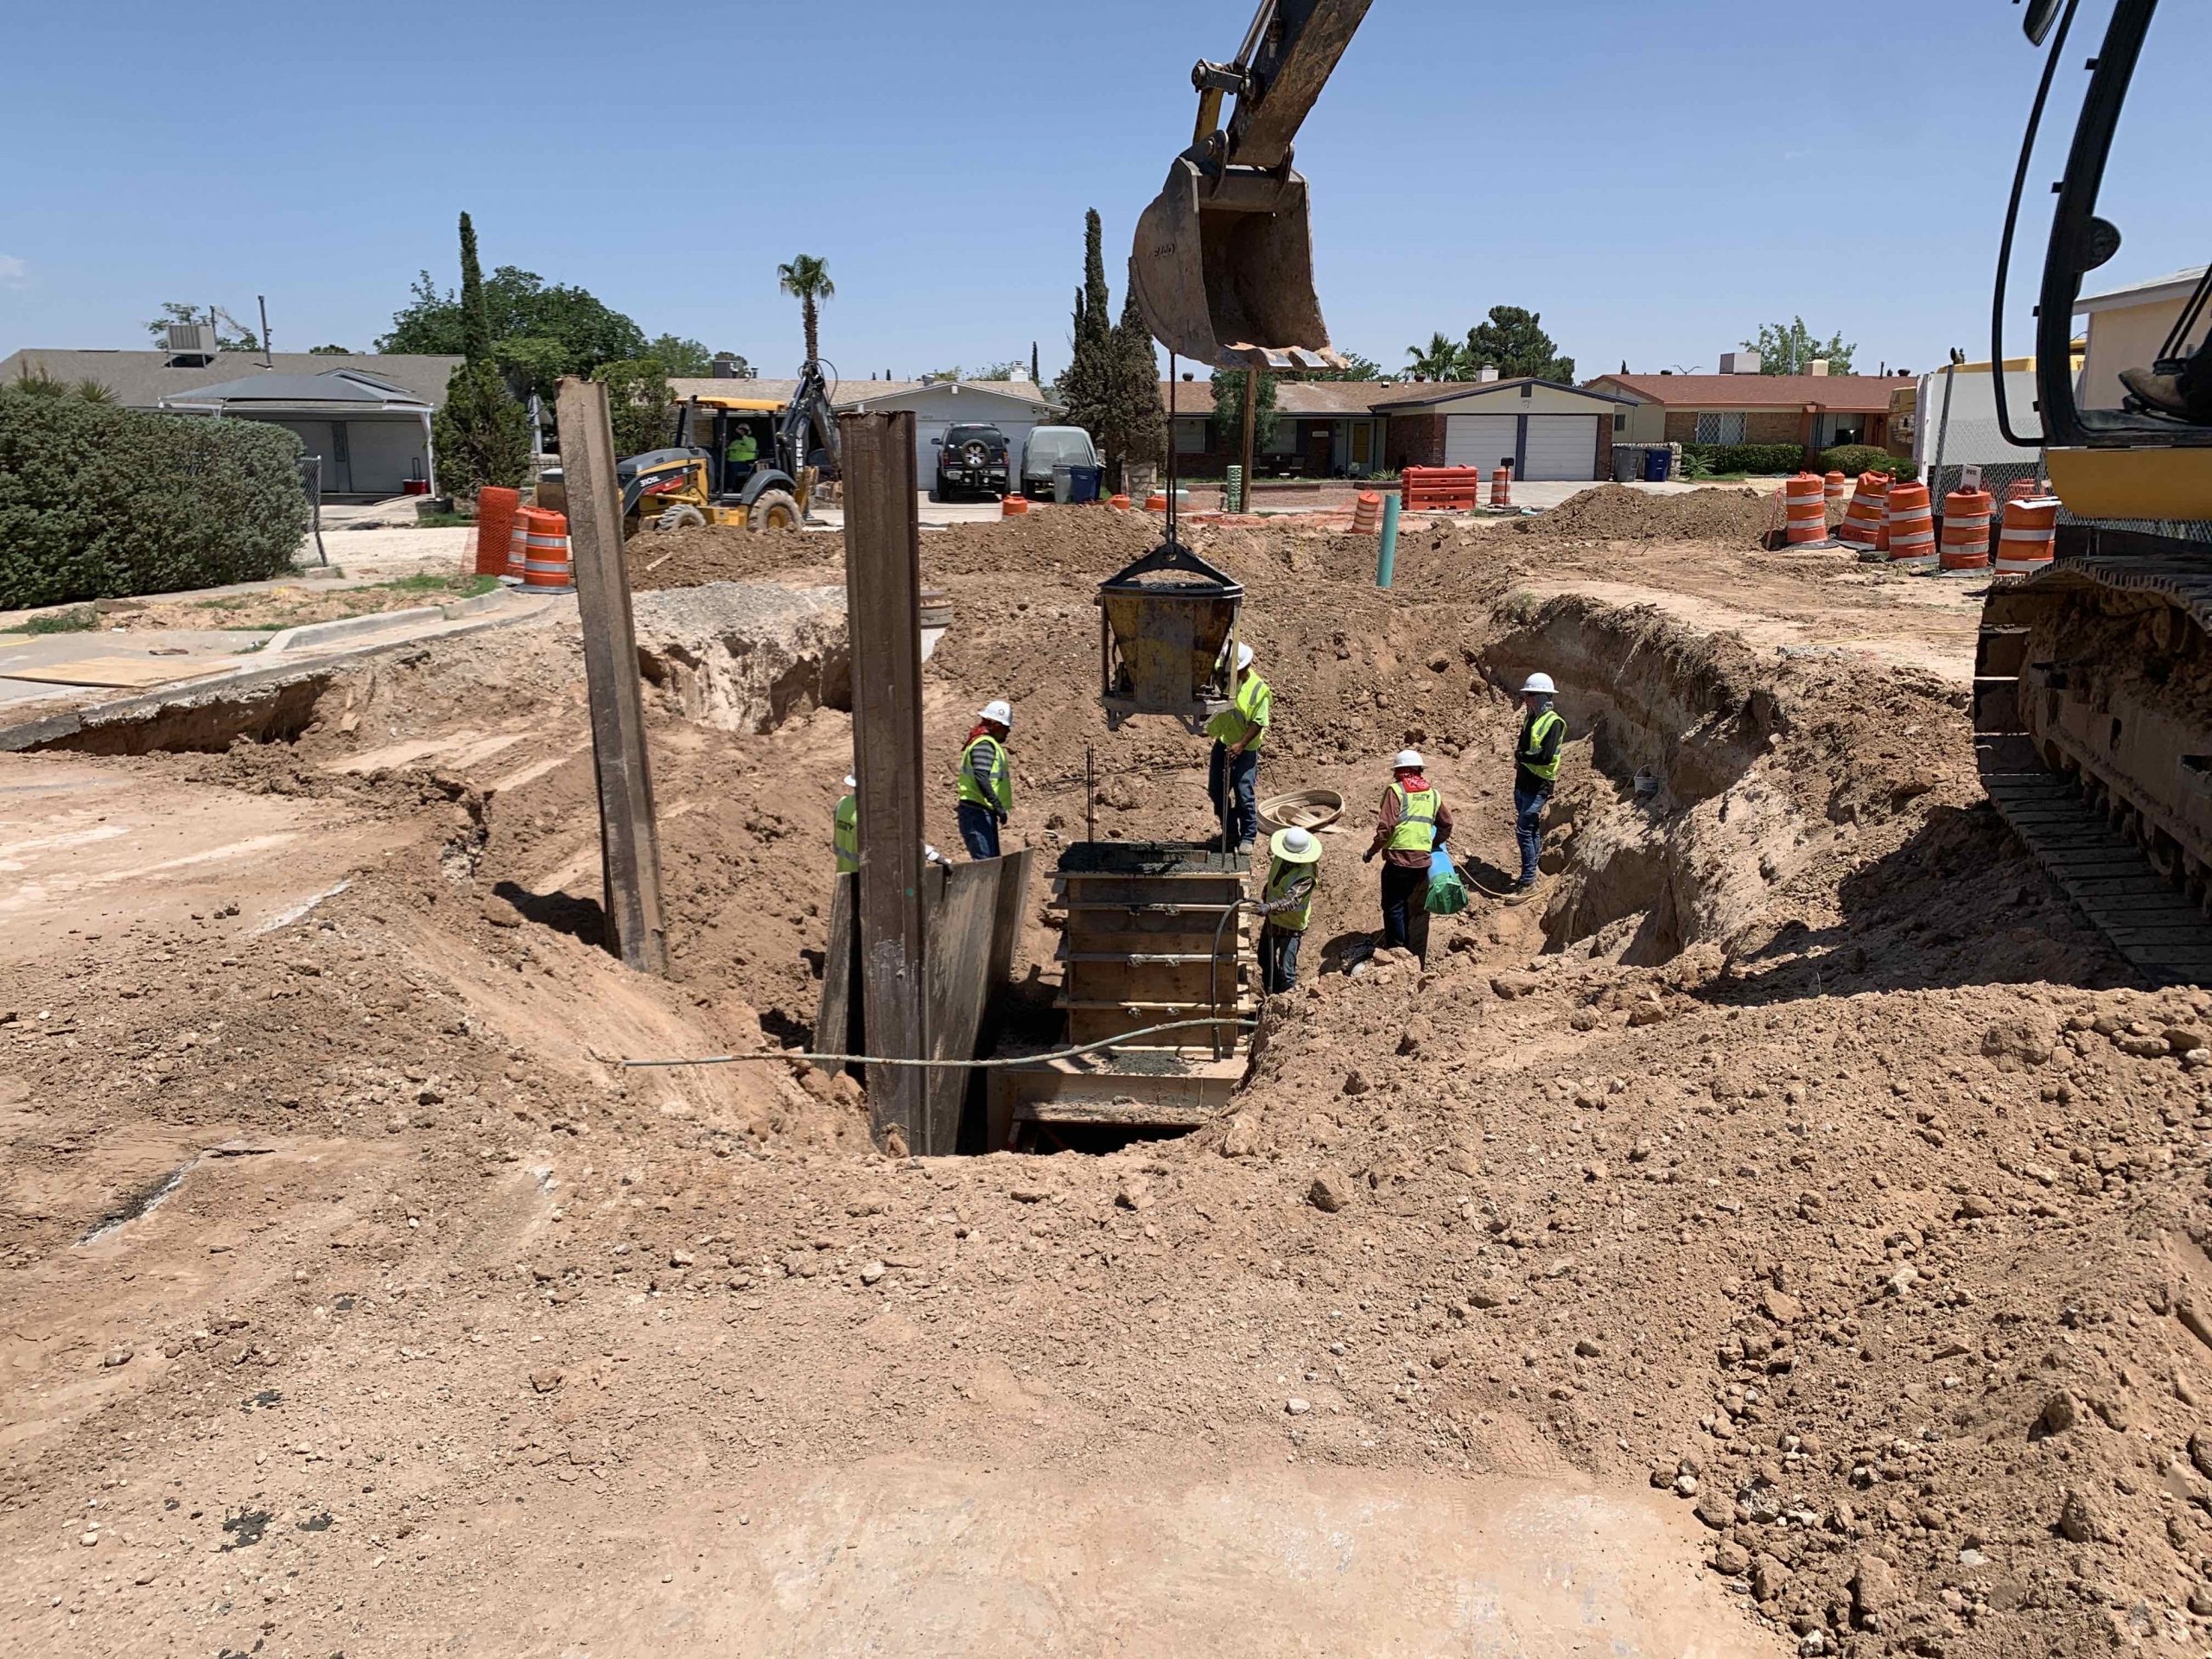 After over a year, Sam Snead stormwater work completed in El Paso